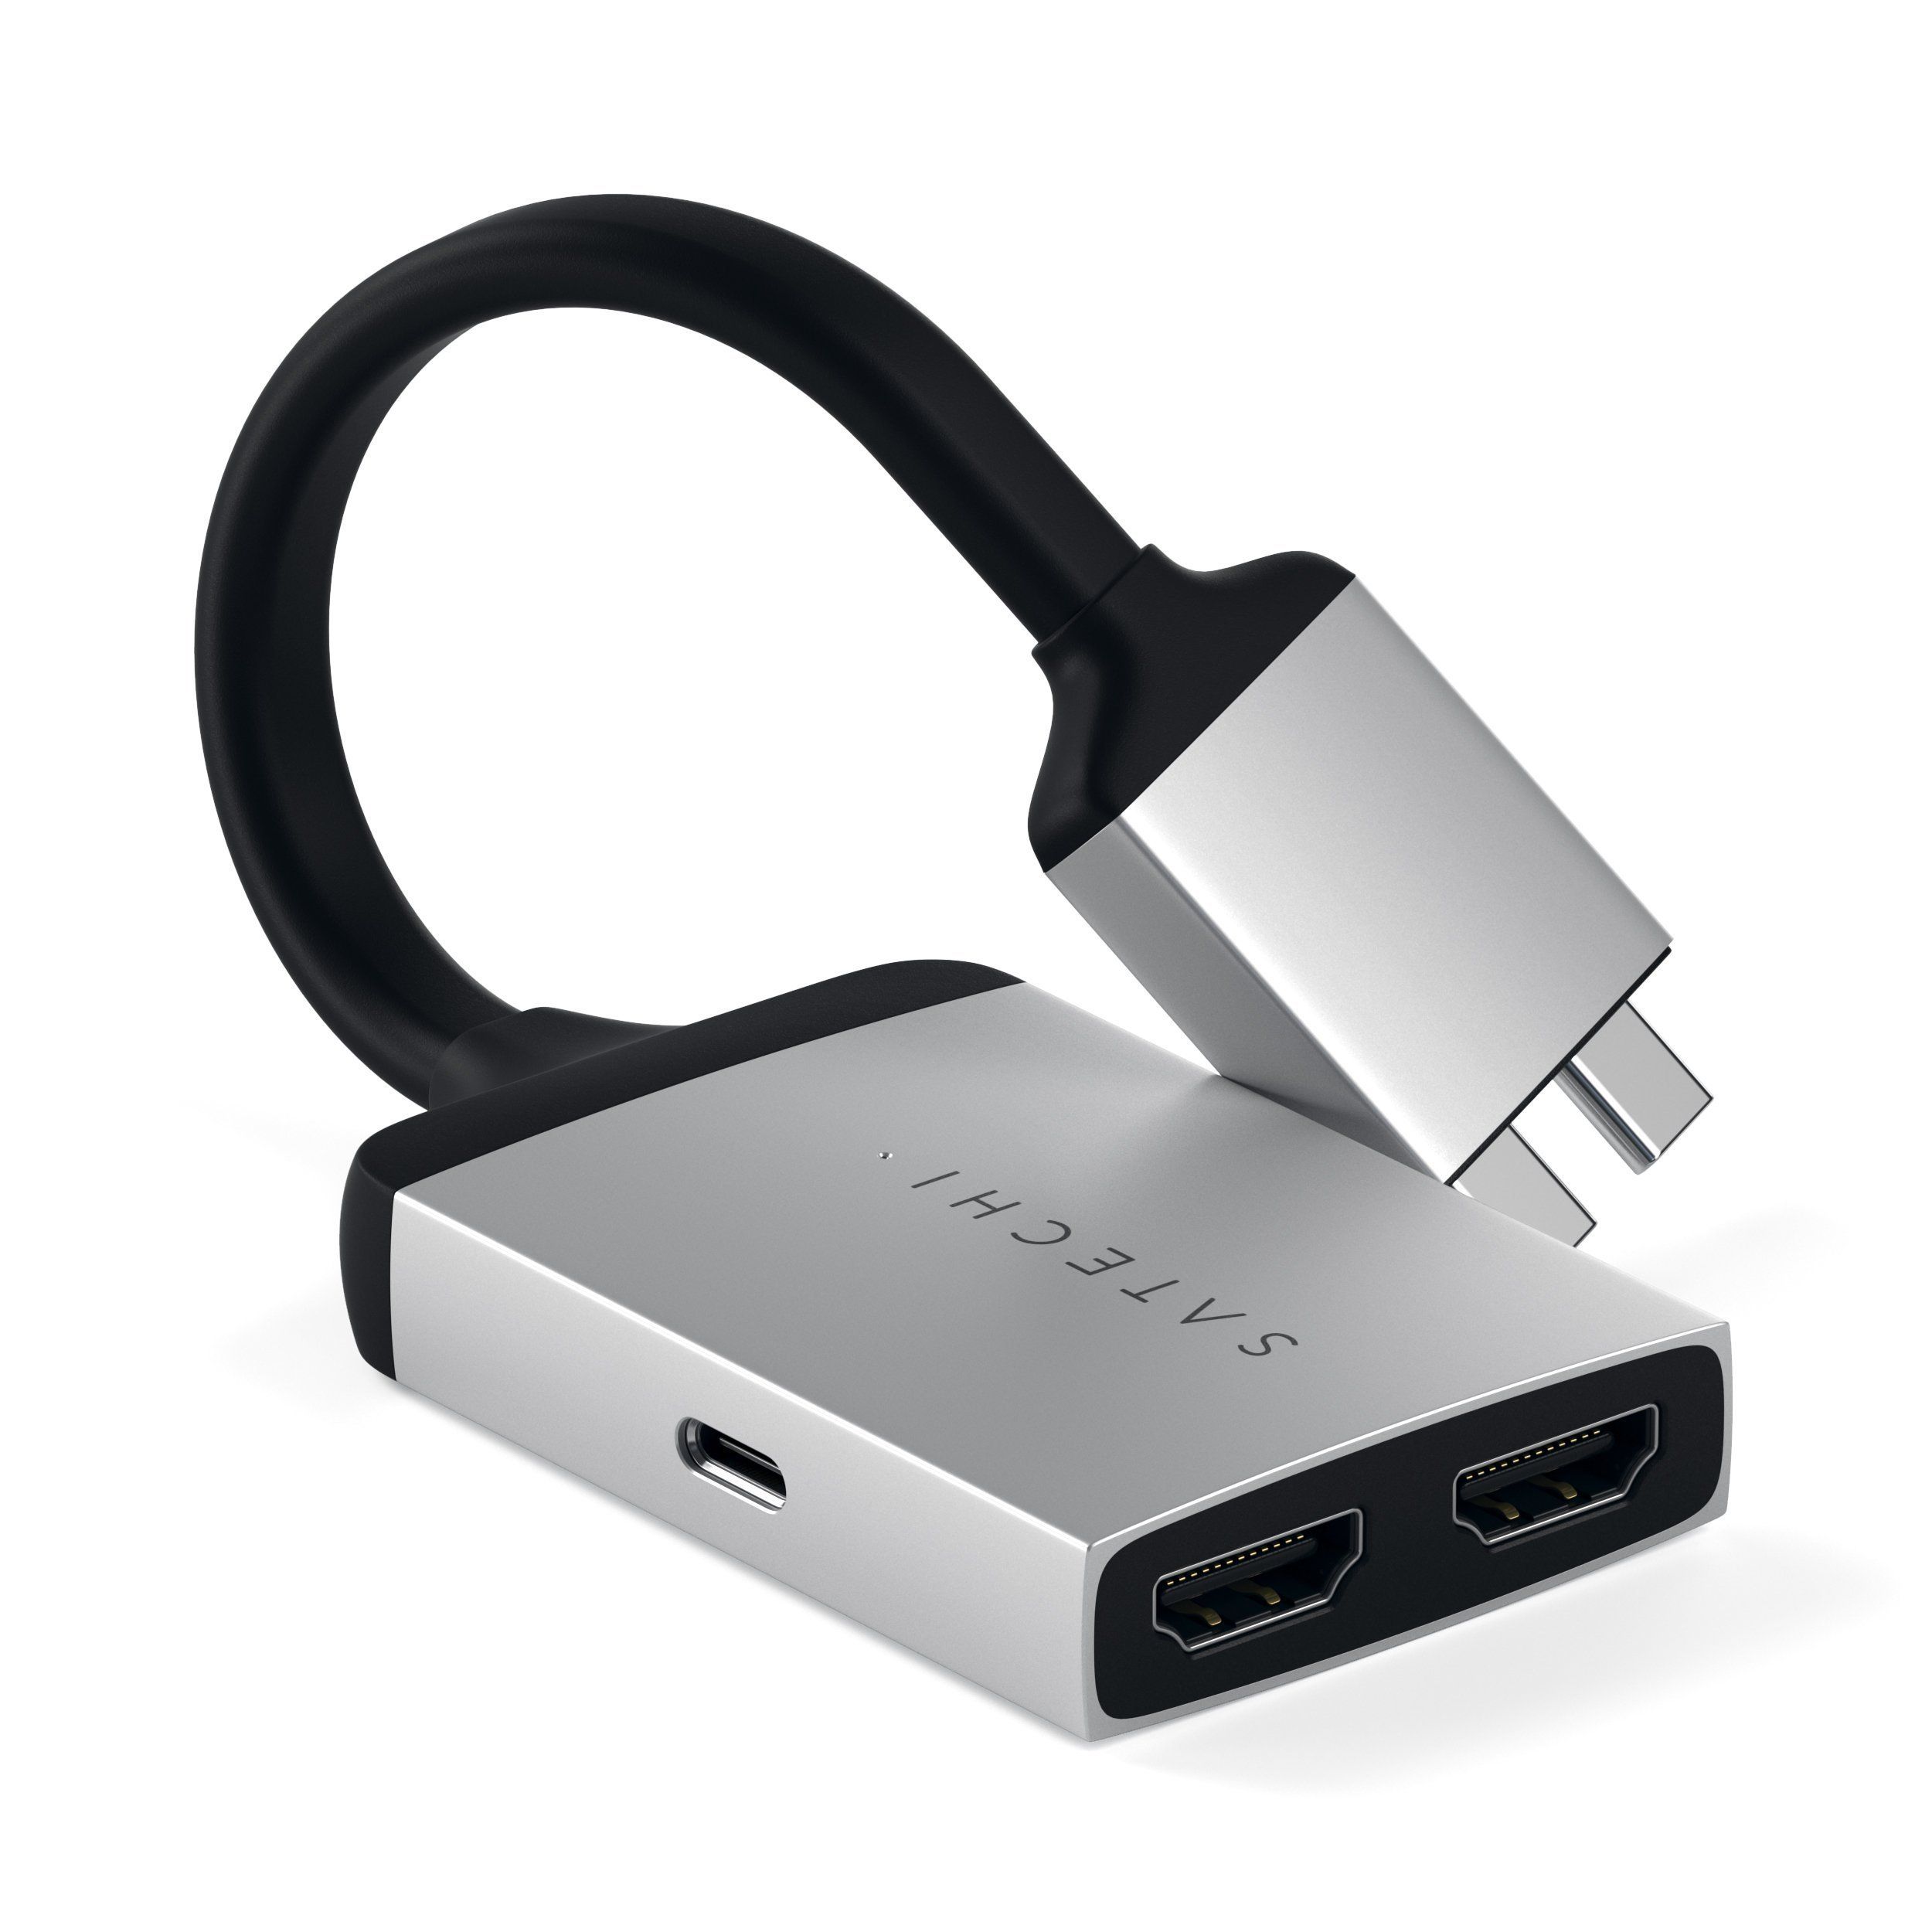 Satechi – USB-C to Dual 4K HDMI Adapter (silver)